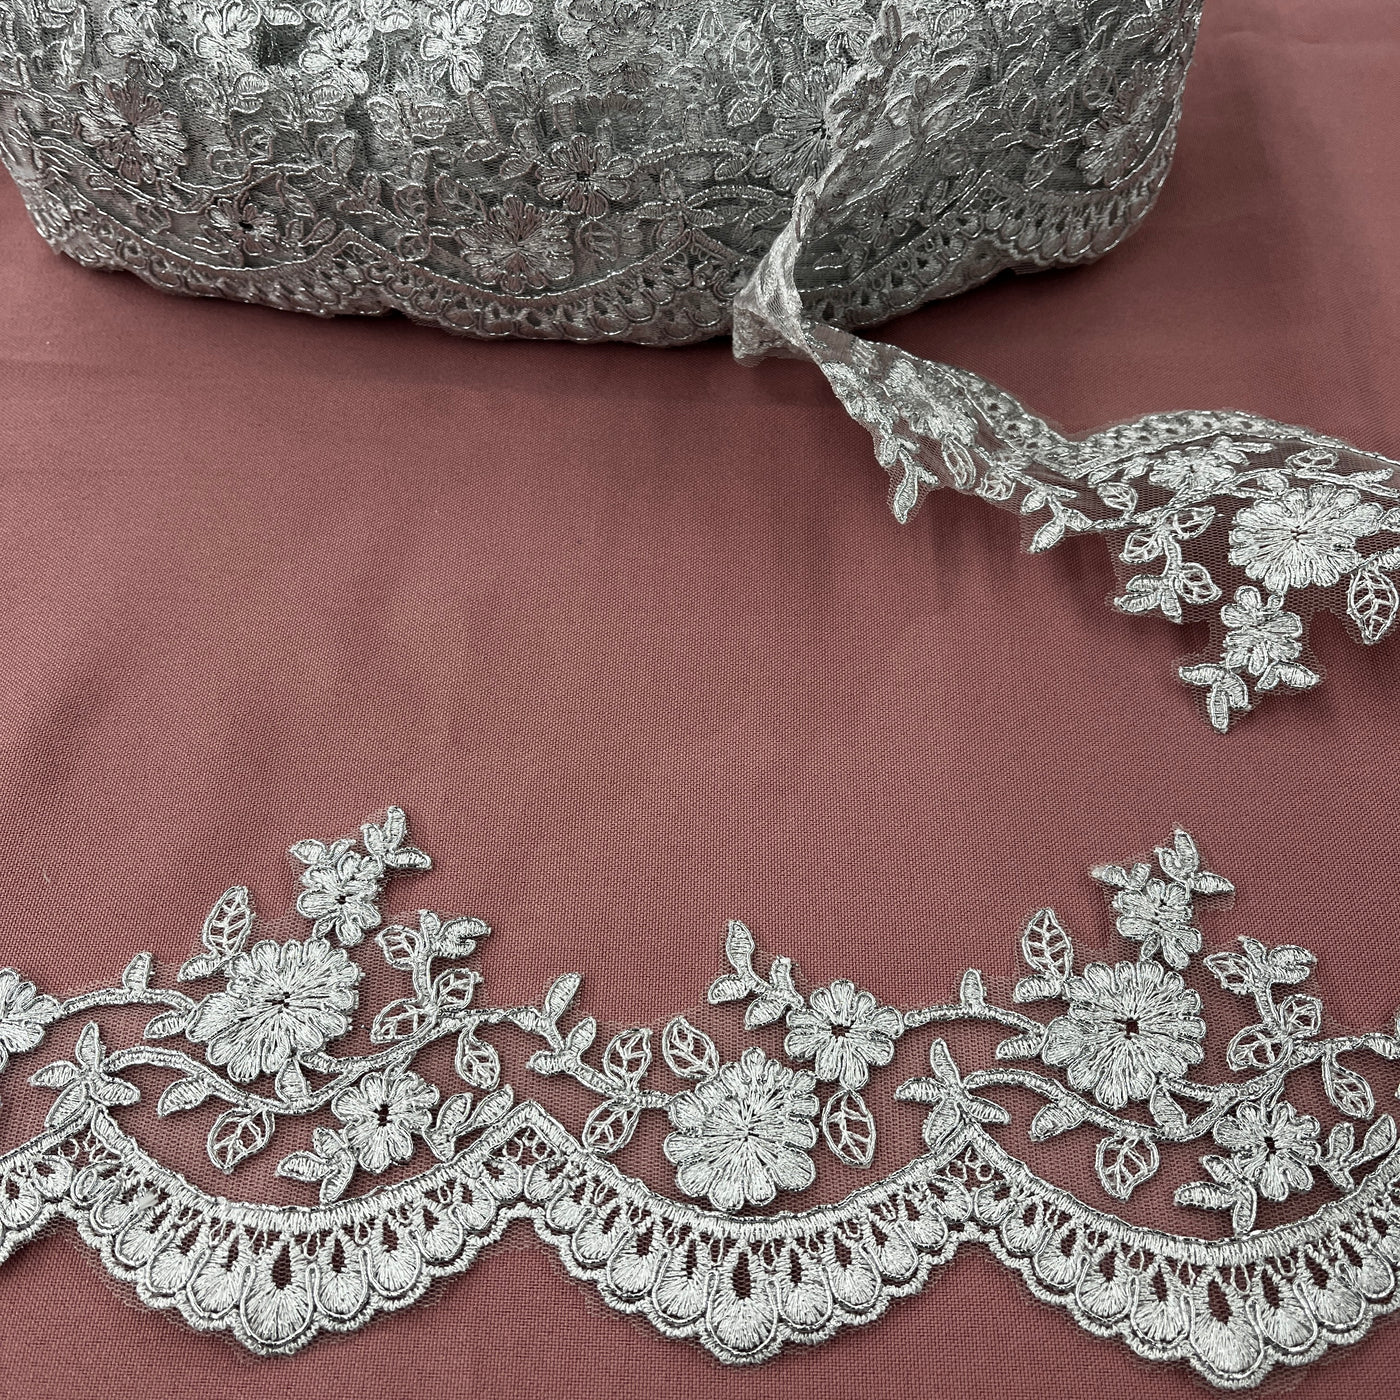 Corded Lace Trimming Embroidered on 100% Polyester Net Mesh | Lace USA - 96215W